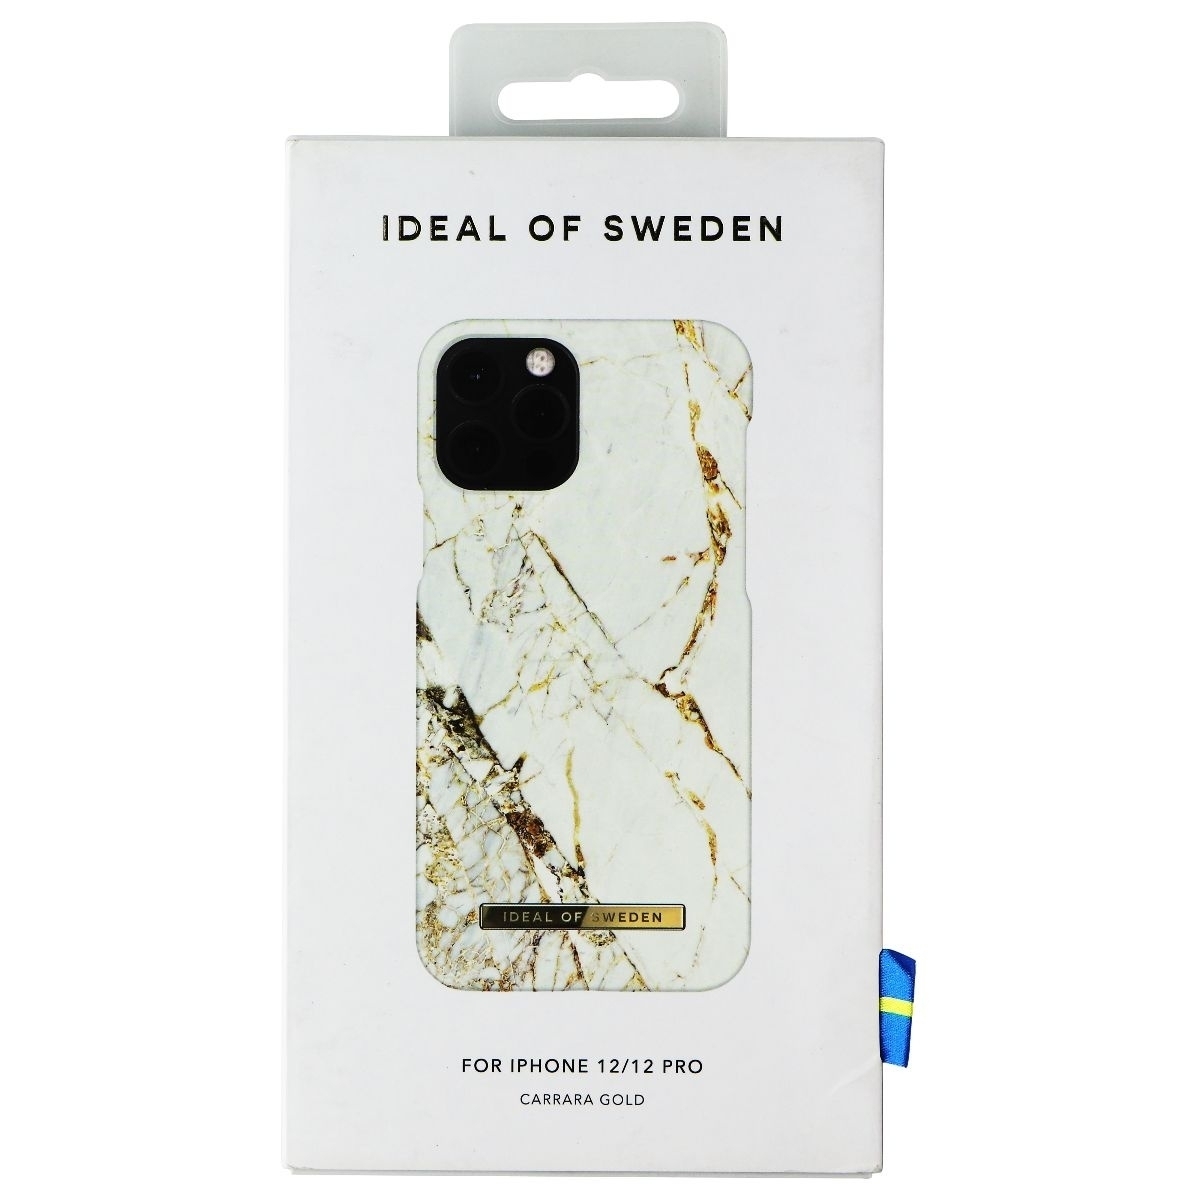 IDeal Of Sweden Printed Case For Apple IPhone 12/12 Pro - Carrara Gold